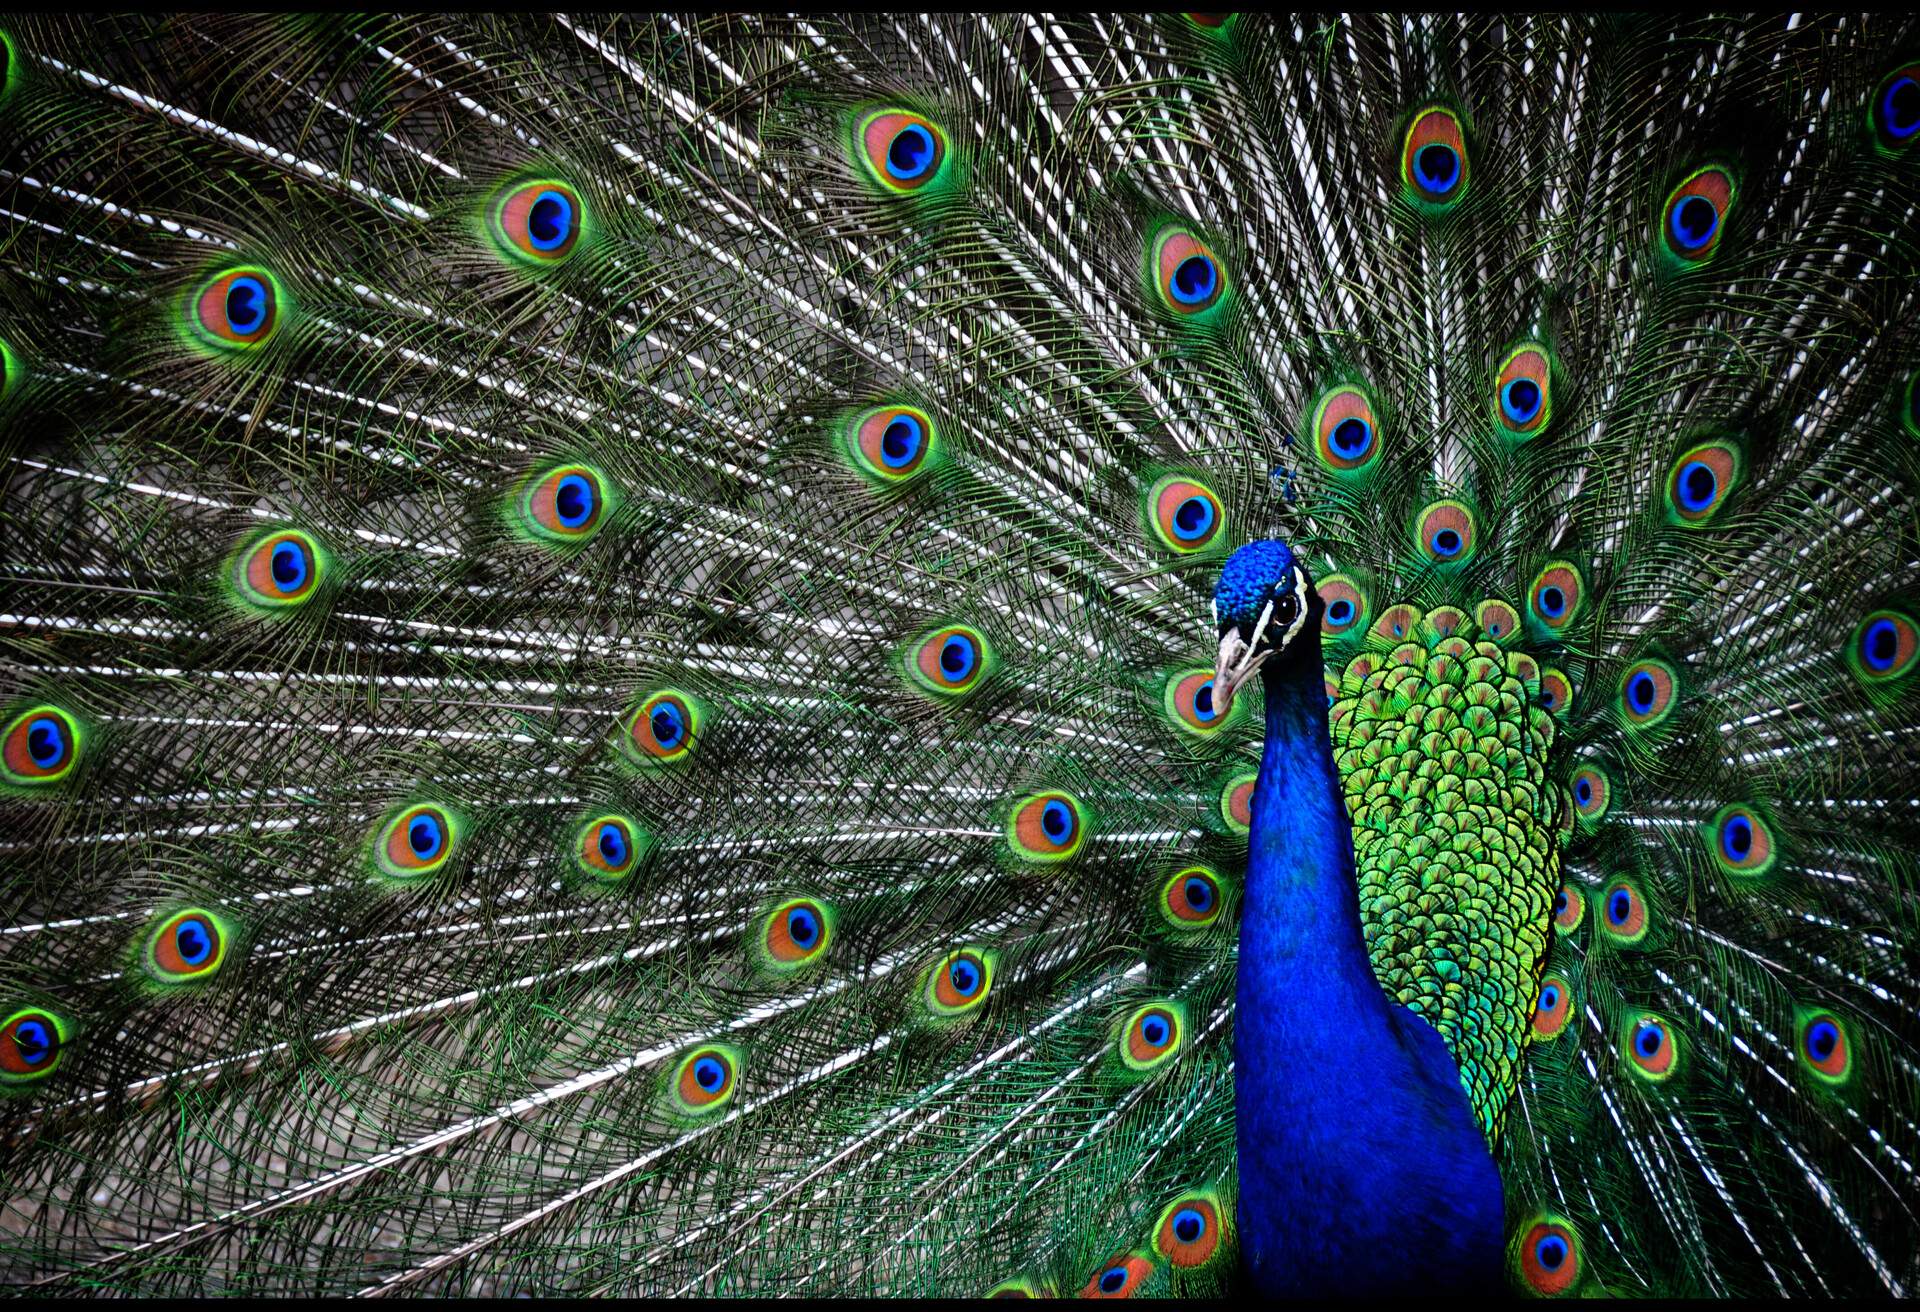 THEME_ANIMAL_PEACOCK_GettyImages-152587564